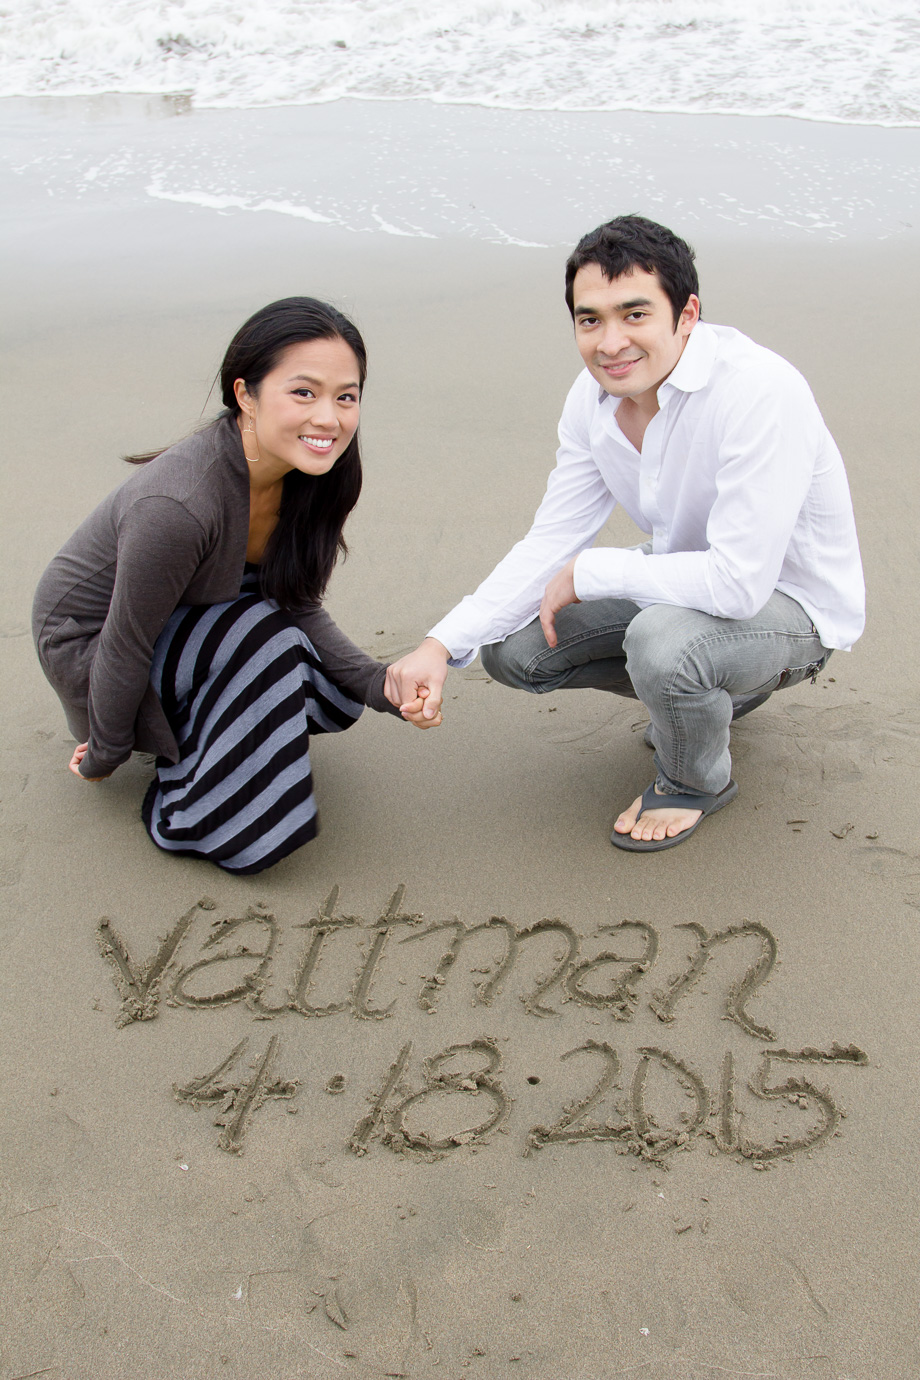 Save the Date written into beach sand - Matt and Van are engaged and getting married!